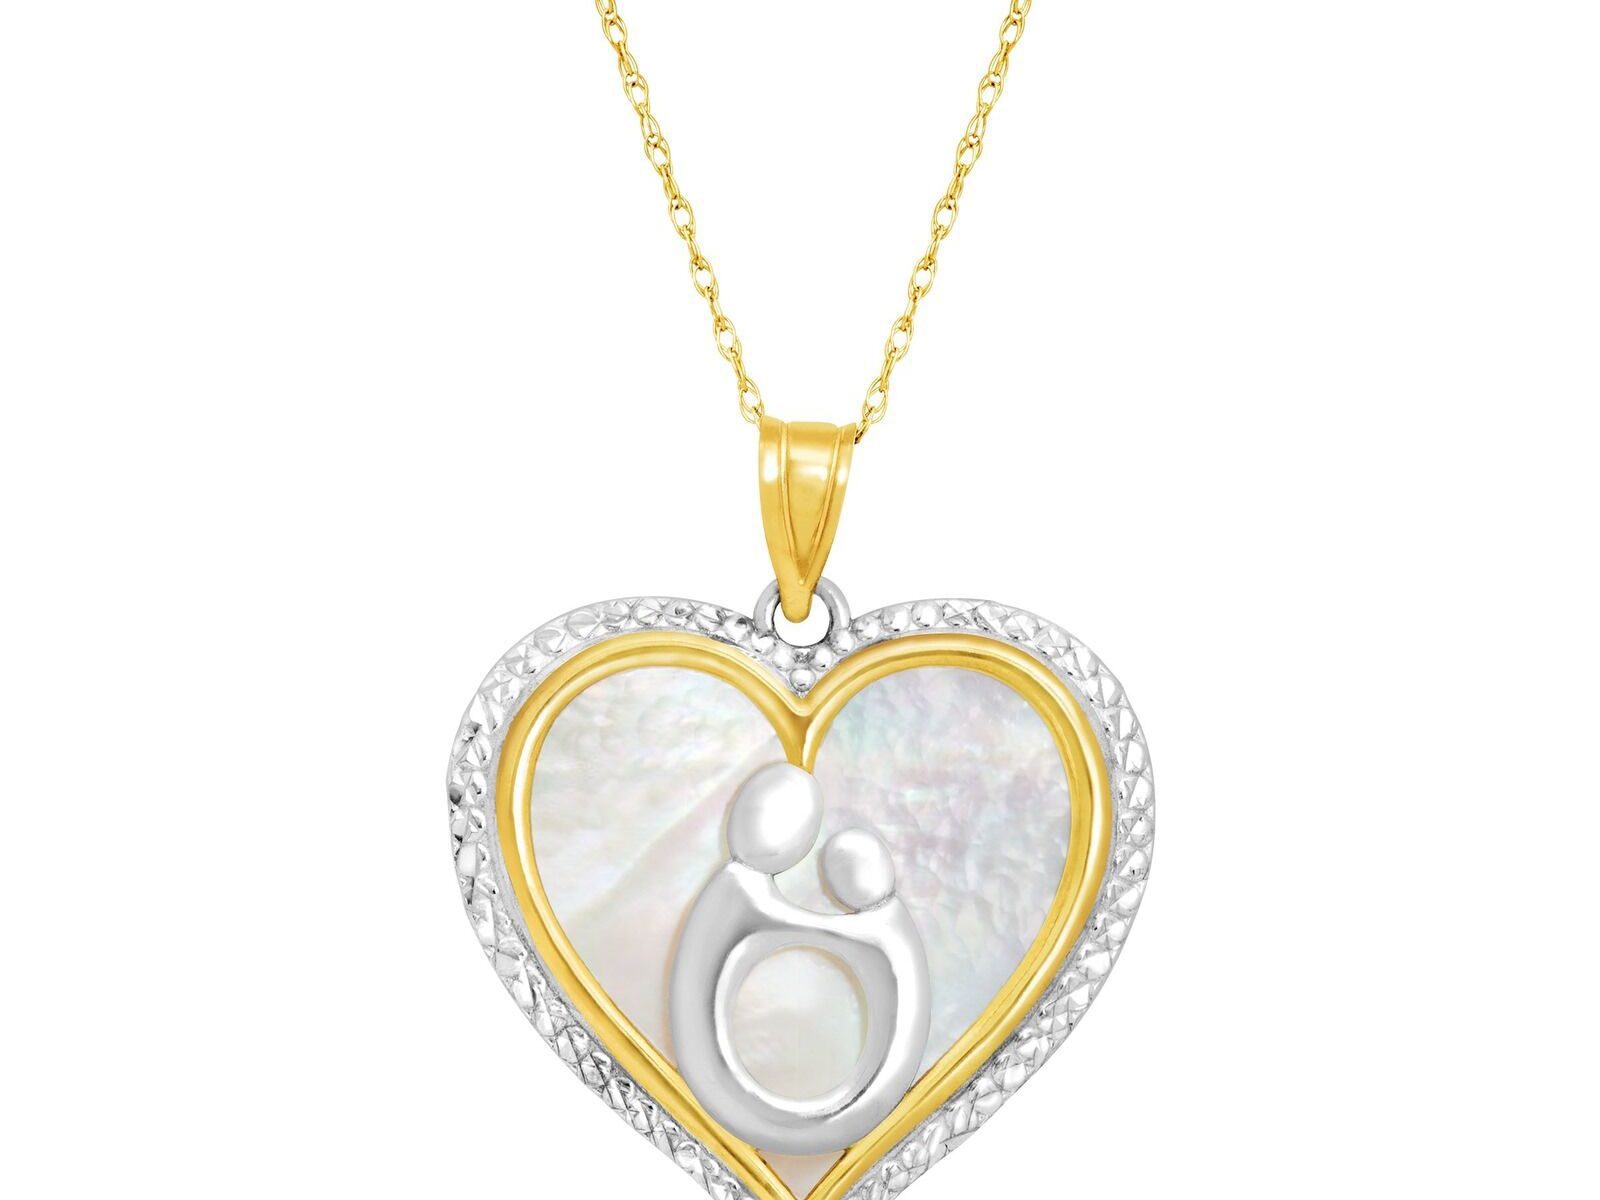 Mother & Child Natural Mother-of-Pearl Heart Pendant in 10K Gold